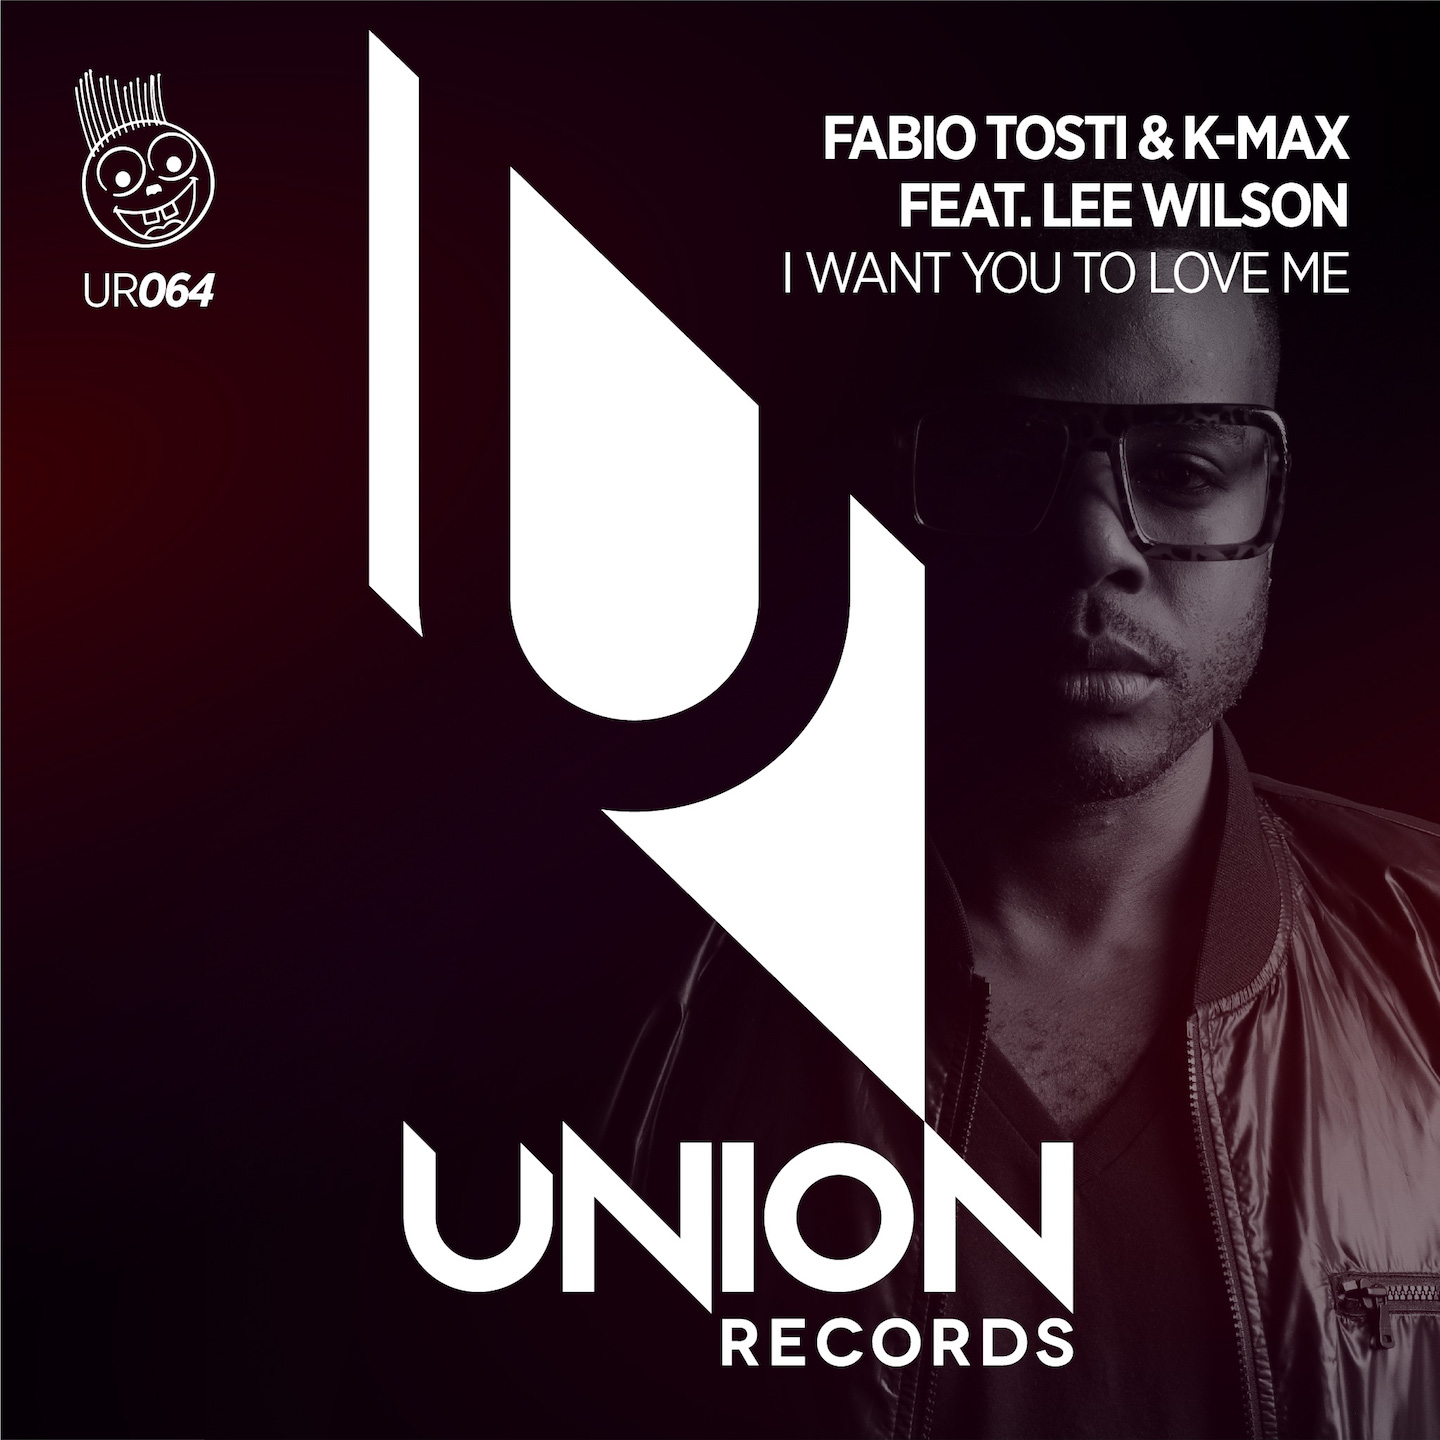 fabio-tosti-k-max-feat-lee-wilson-i-want-you-to-love-me